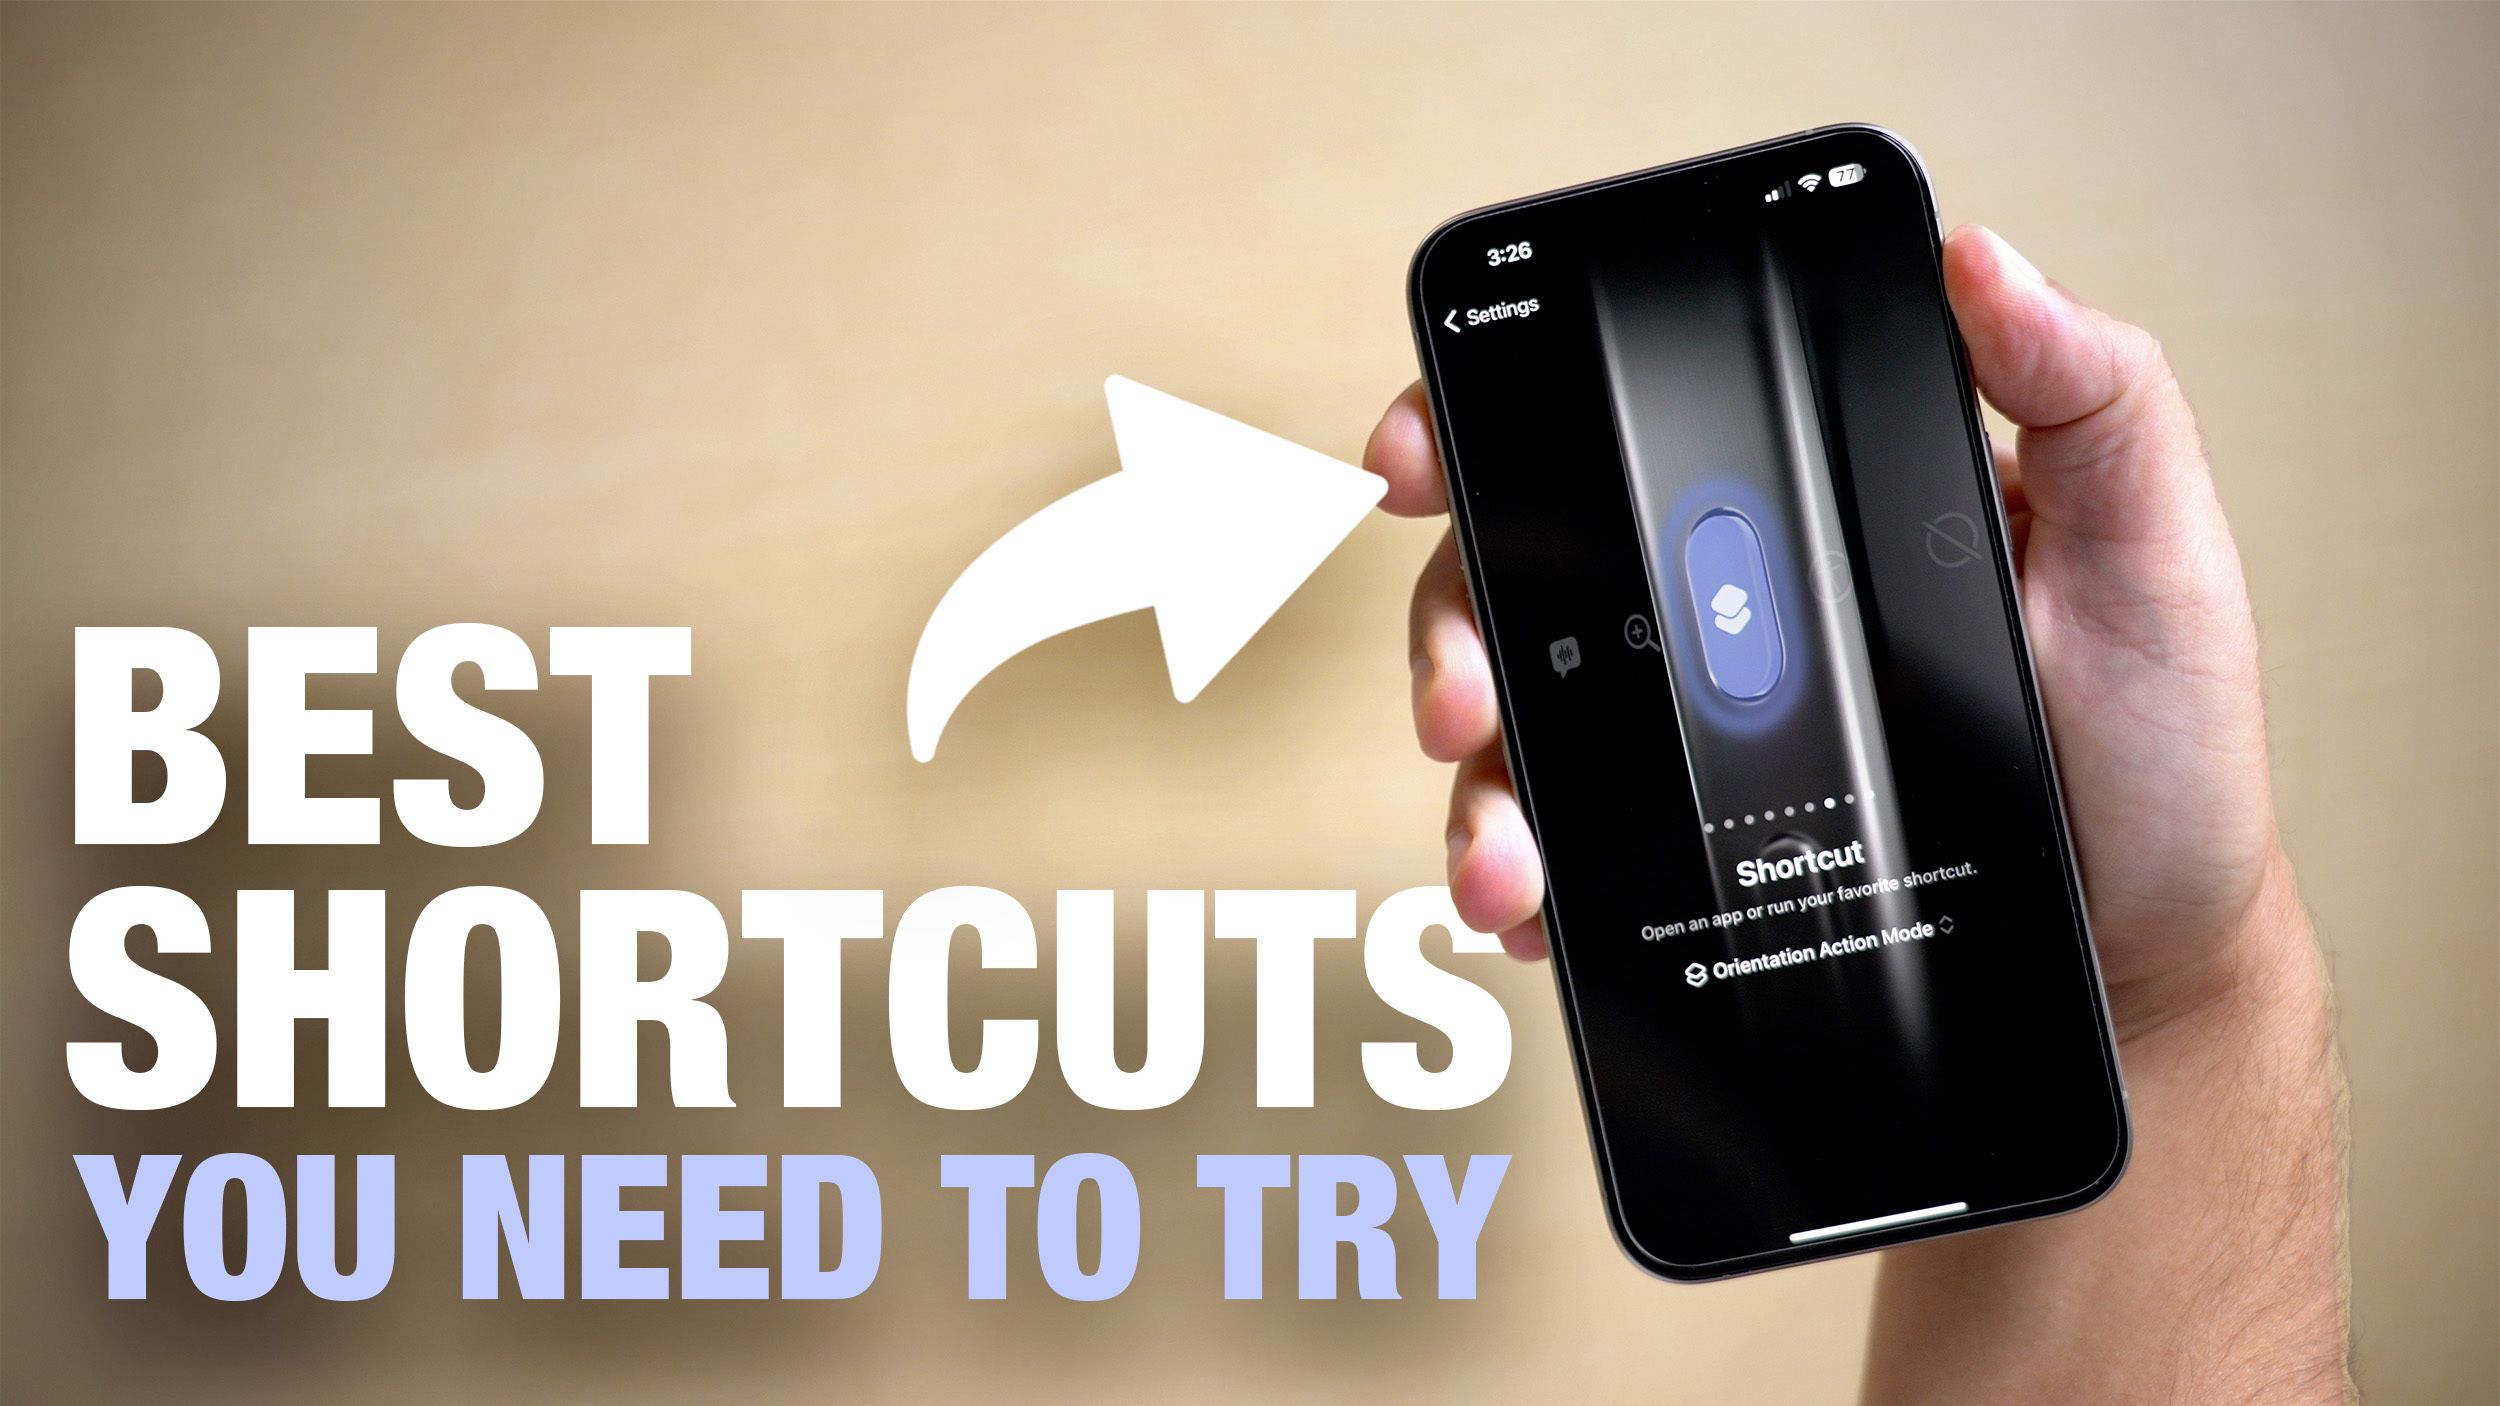 Best Shortcuts You Need to Try Thumb 2.jpg